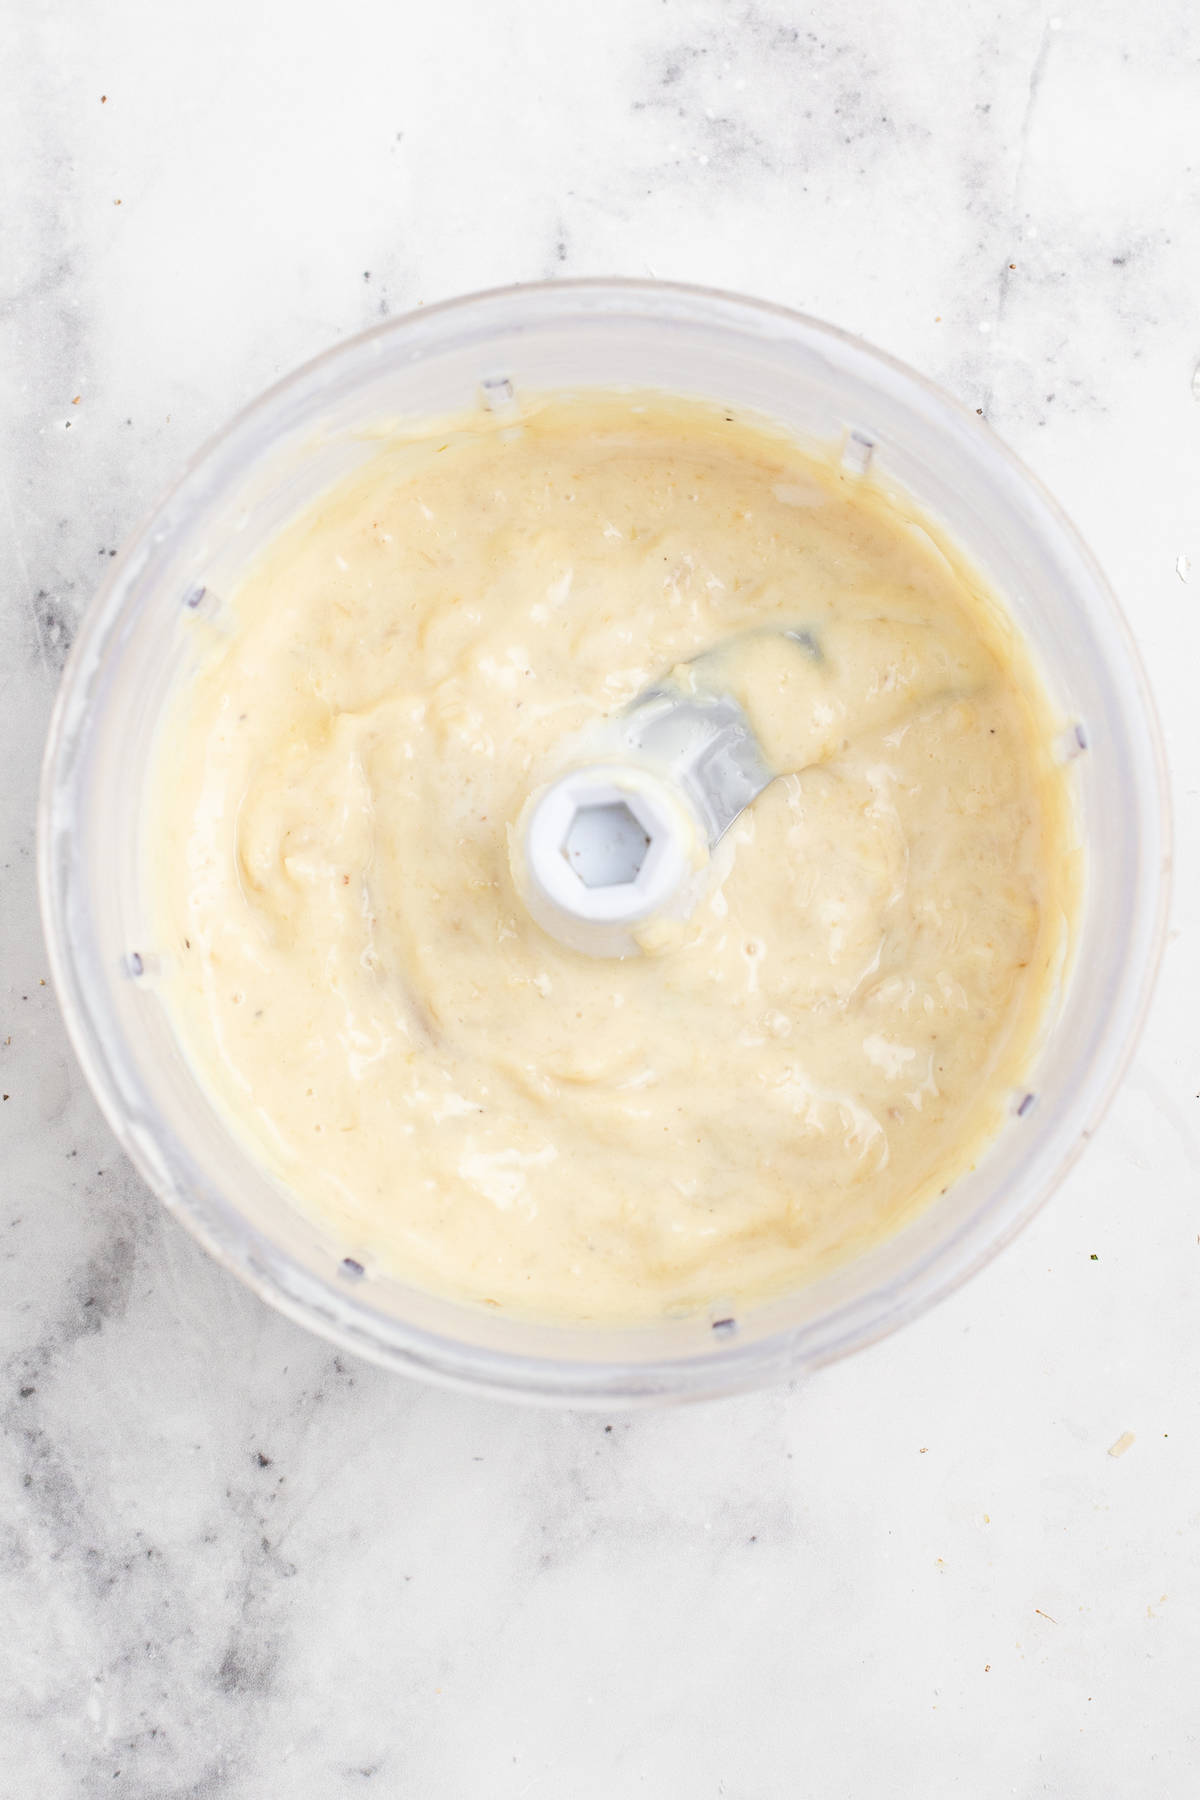 Blended aioli in the food processor. 